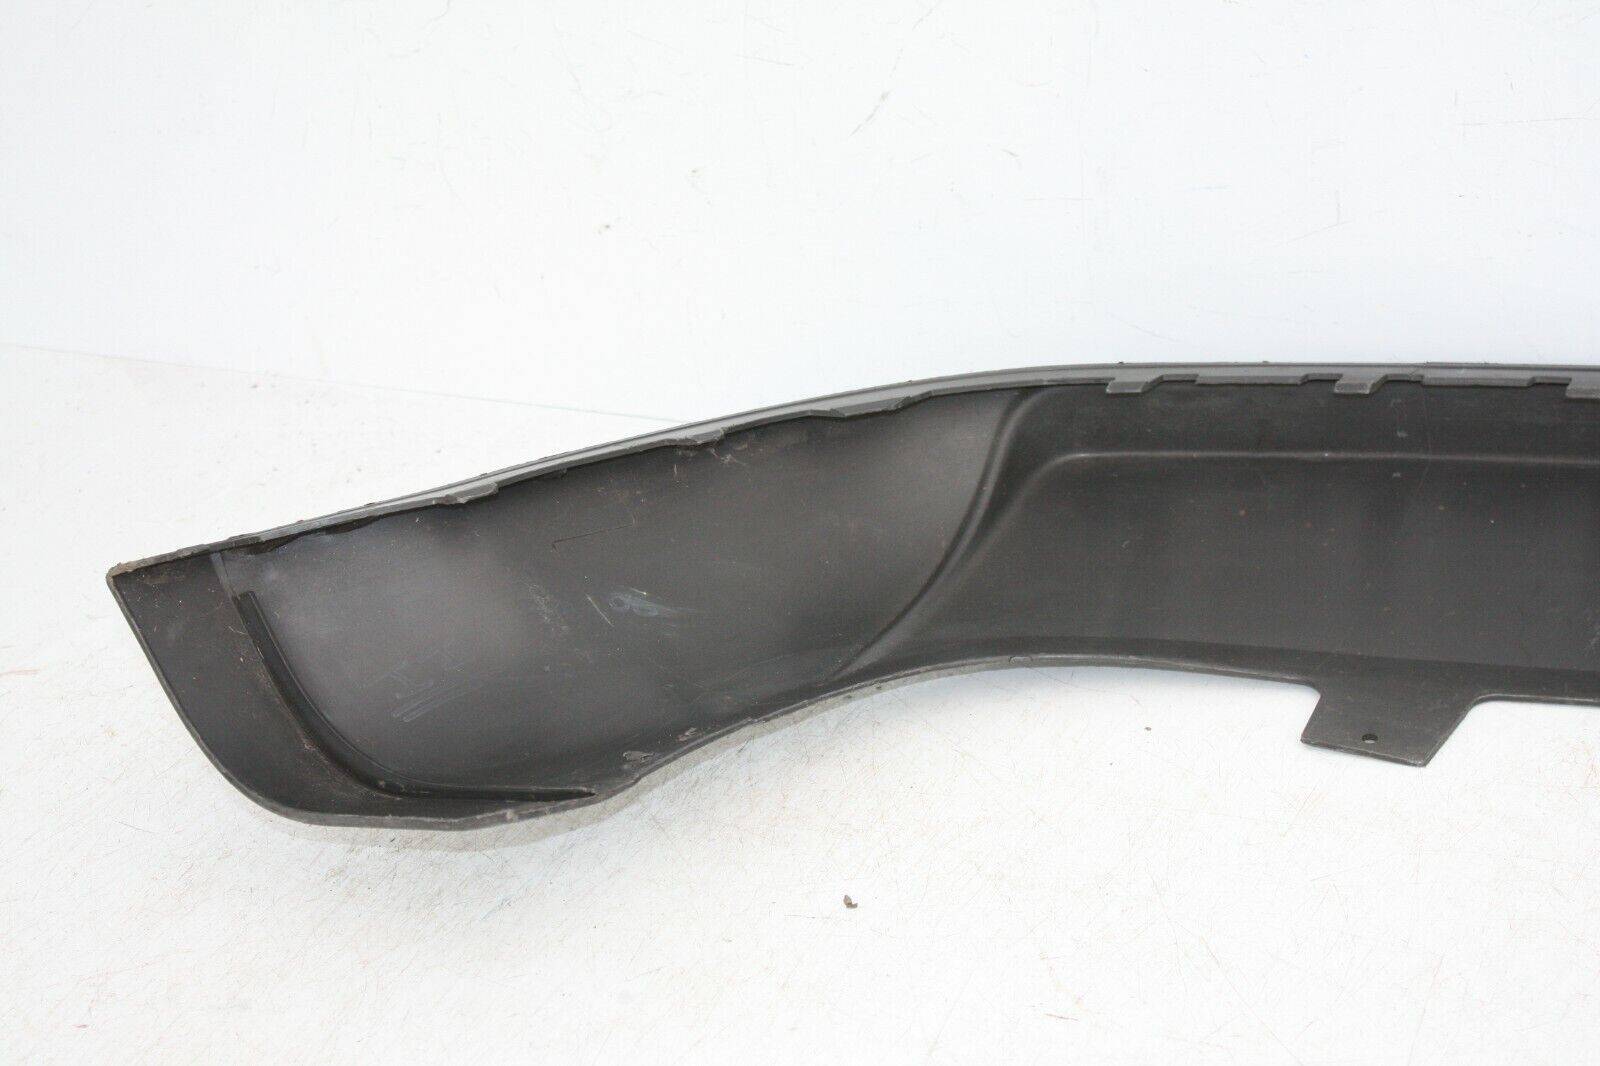 Ford-C-Max-Rear-Bumper-Lower-Section-2004-To-2007-3M51-R17A894-AB-175902867116-6